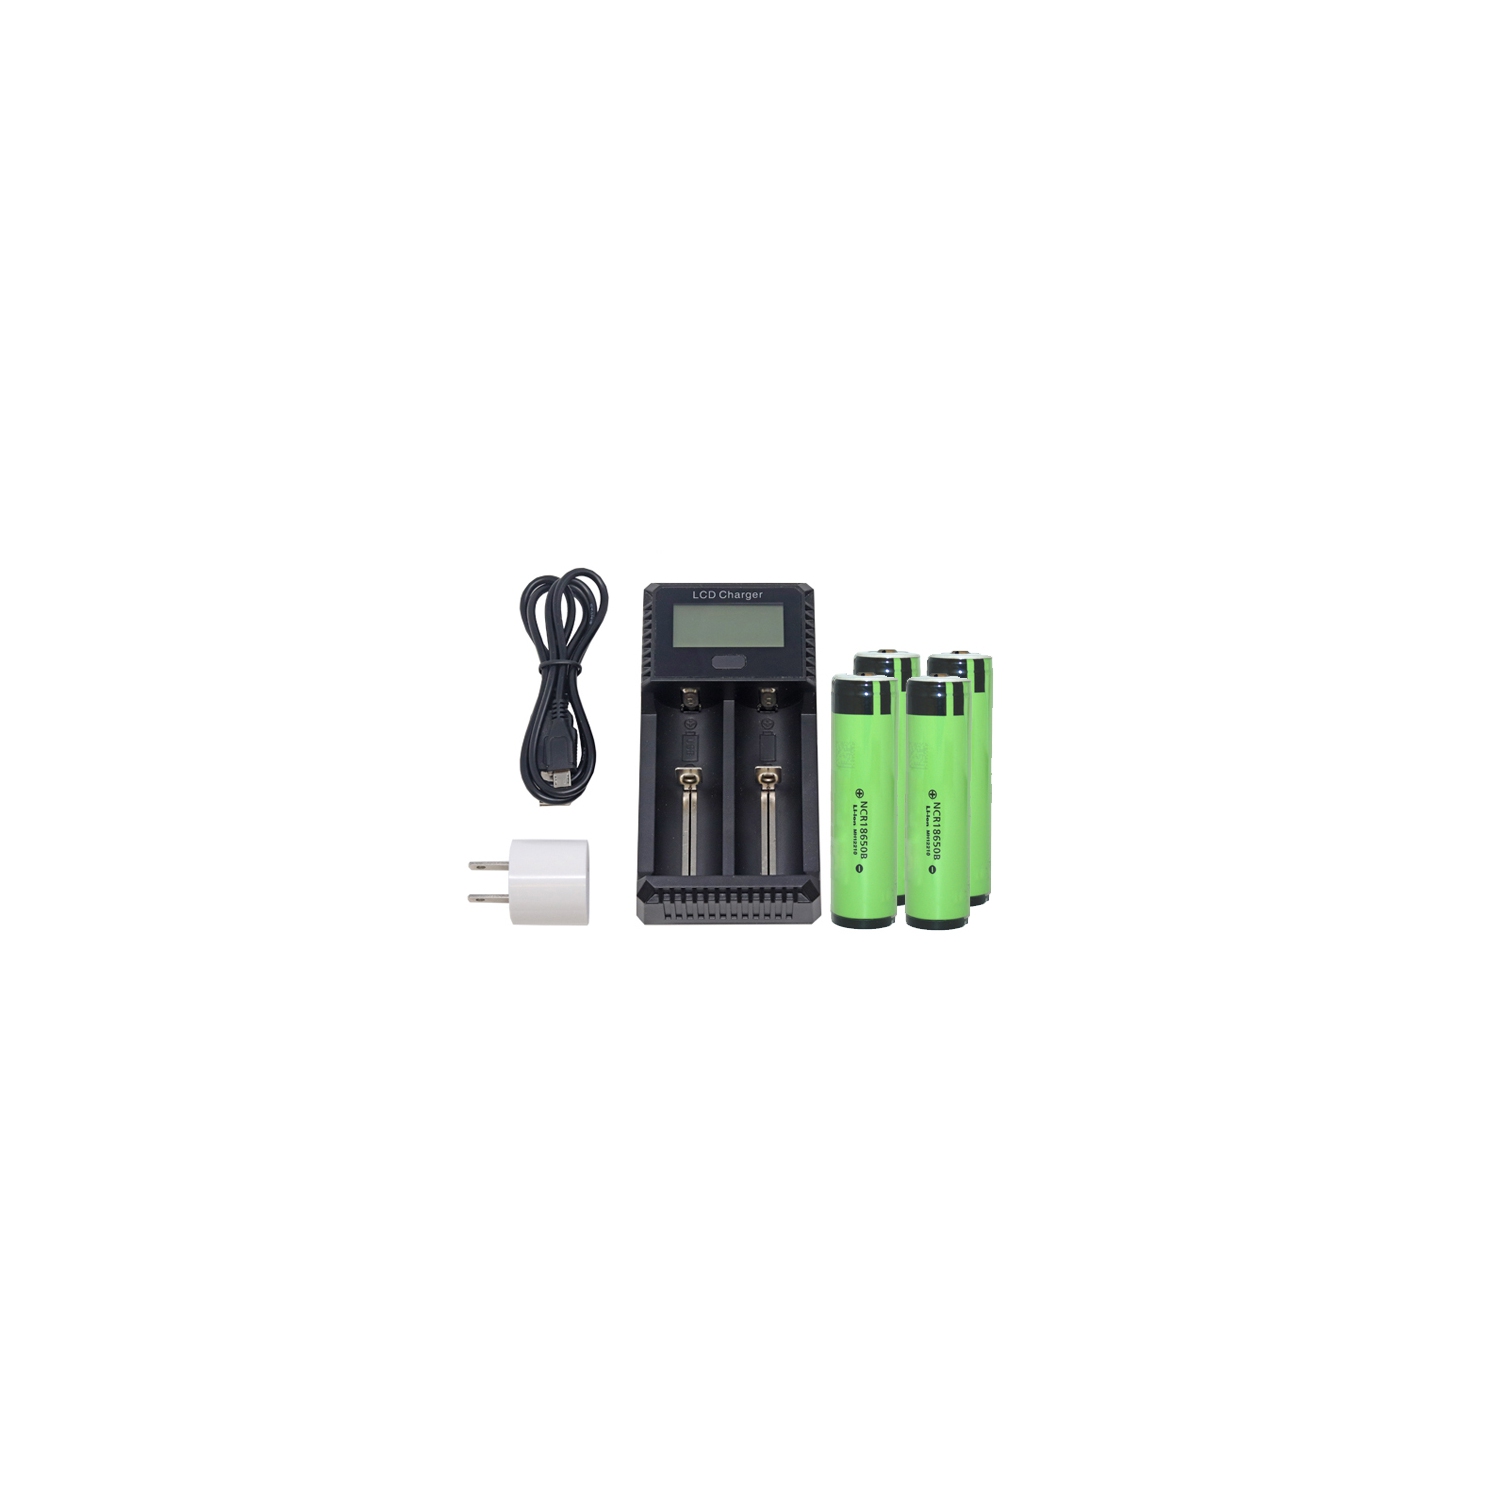 2-Slot Fast Battery Charger + 4 x 3.7 Volt Panasonic 18650 Lithium Ion Button Top Battery (3400 mAh)